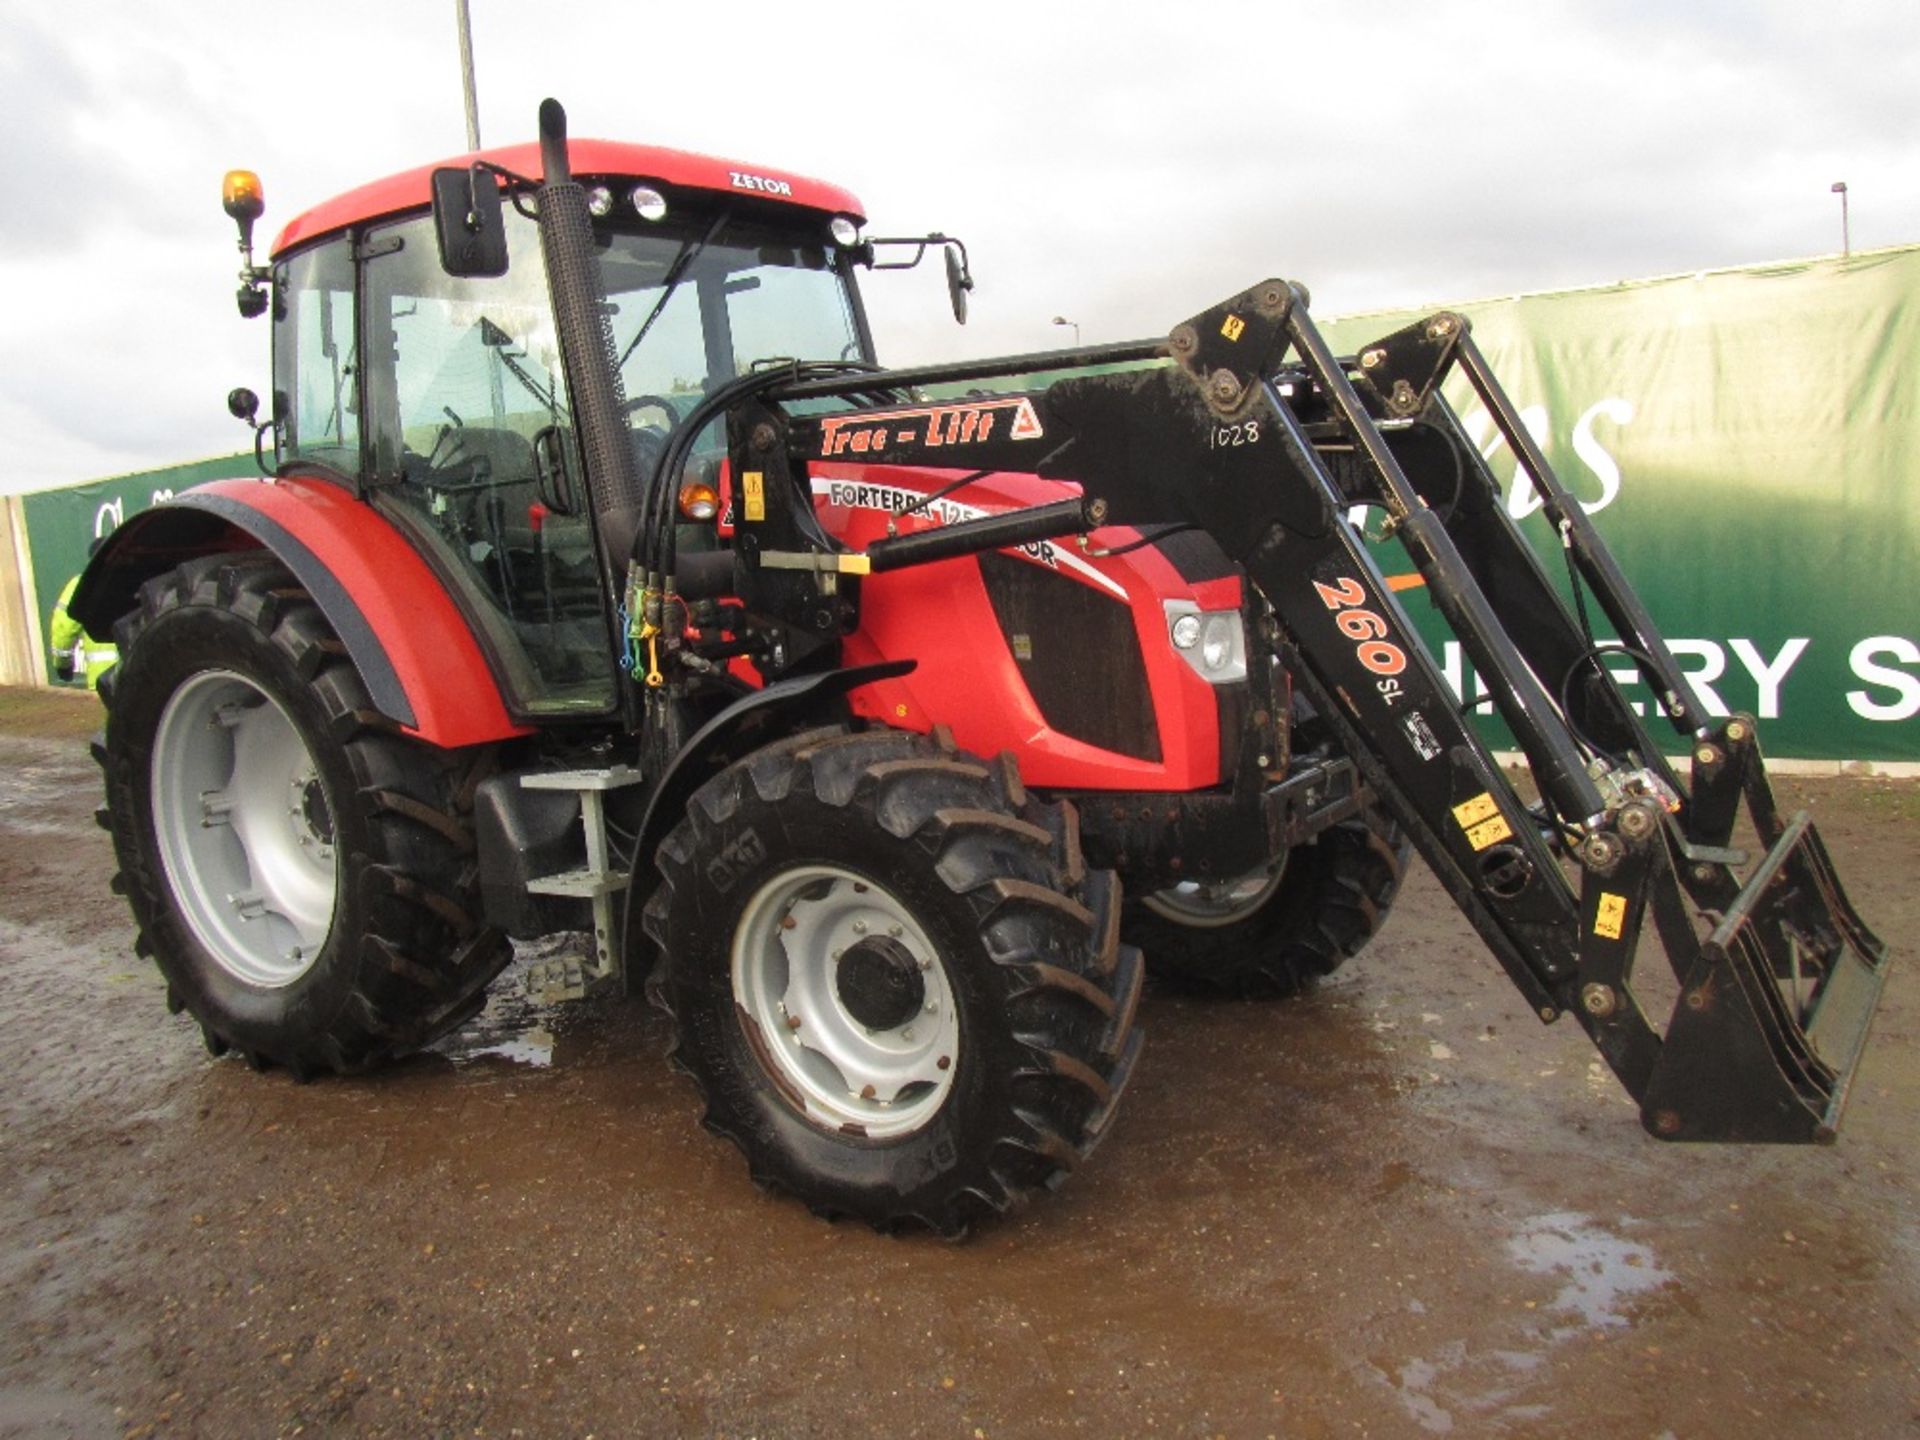 Zetor Forterra 125 4wd Tractor. 260 Trac Lift Loader. Reg Docs will be supplied. Reg. No. AE12 BKN. - Image 4 of 15